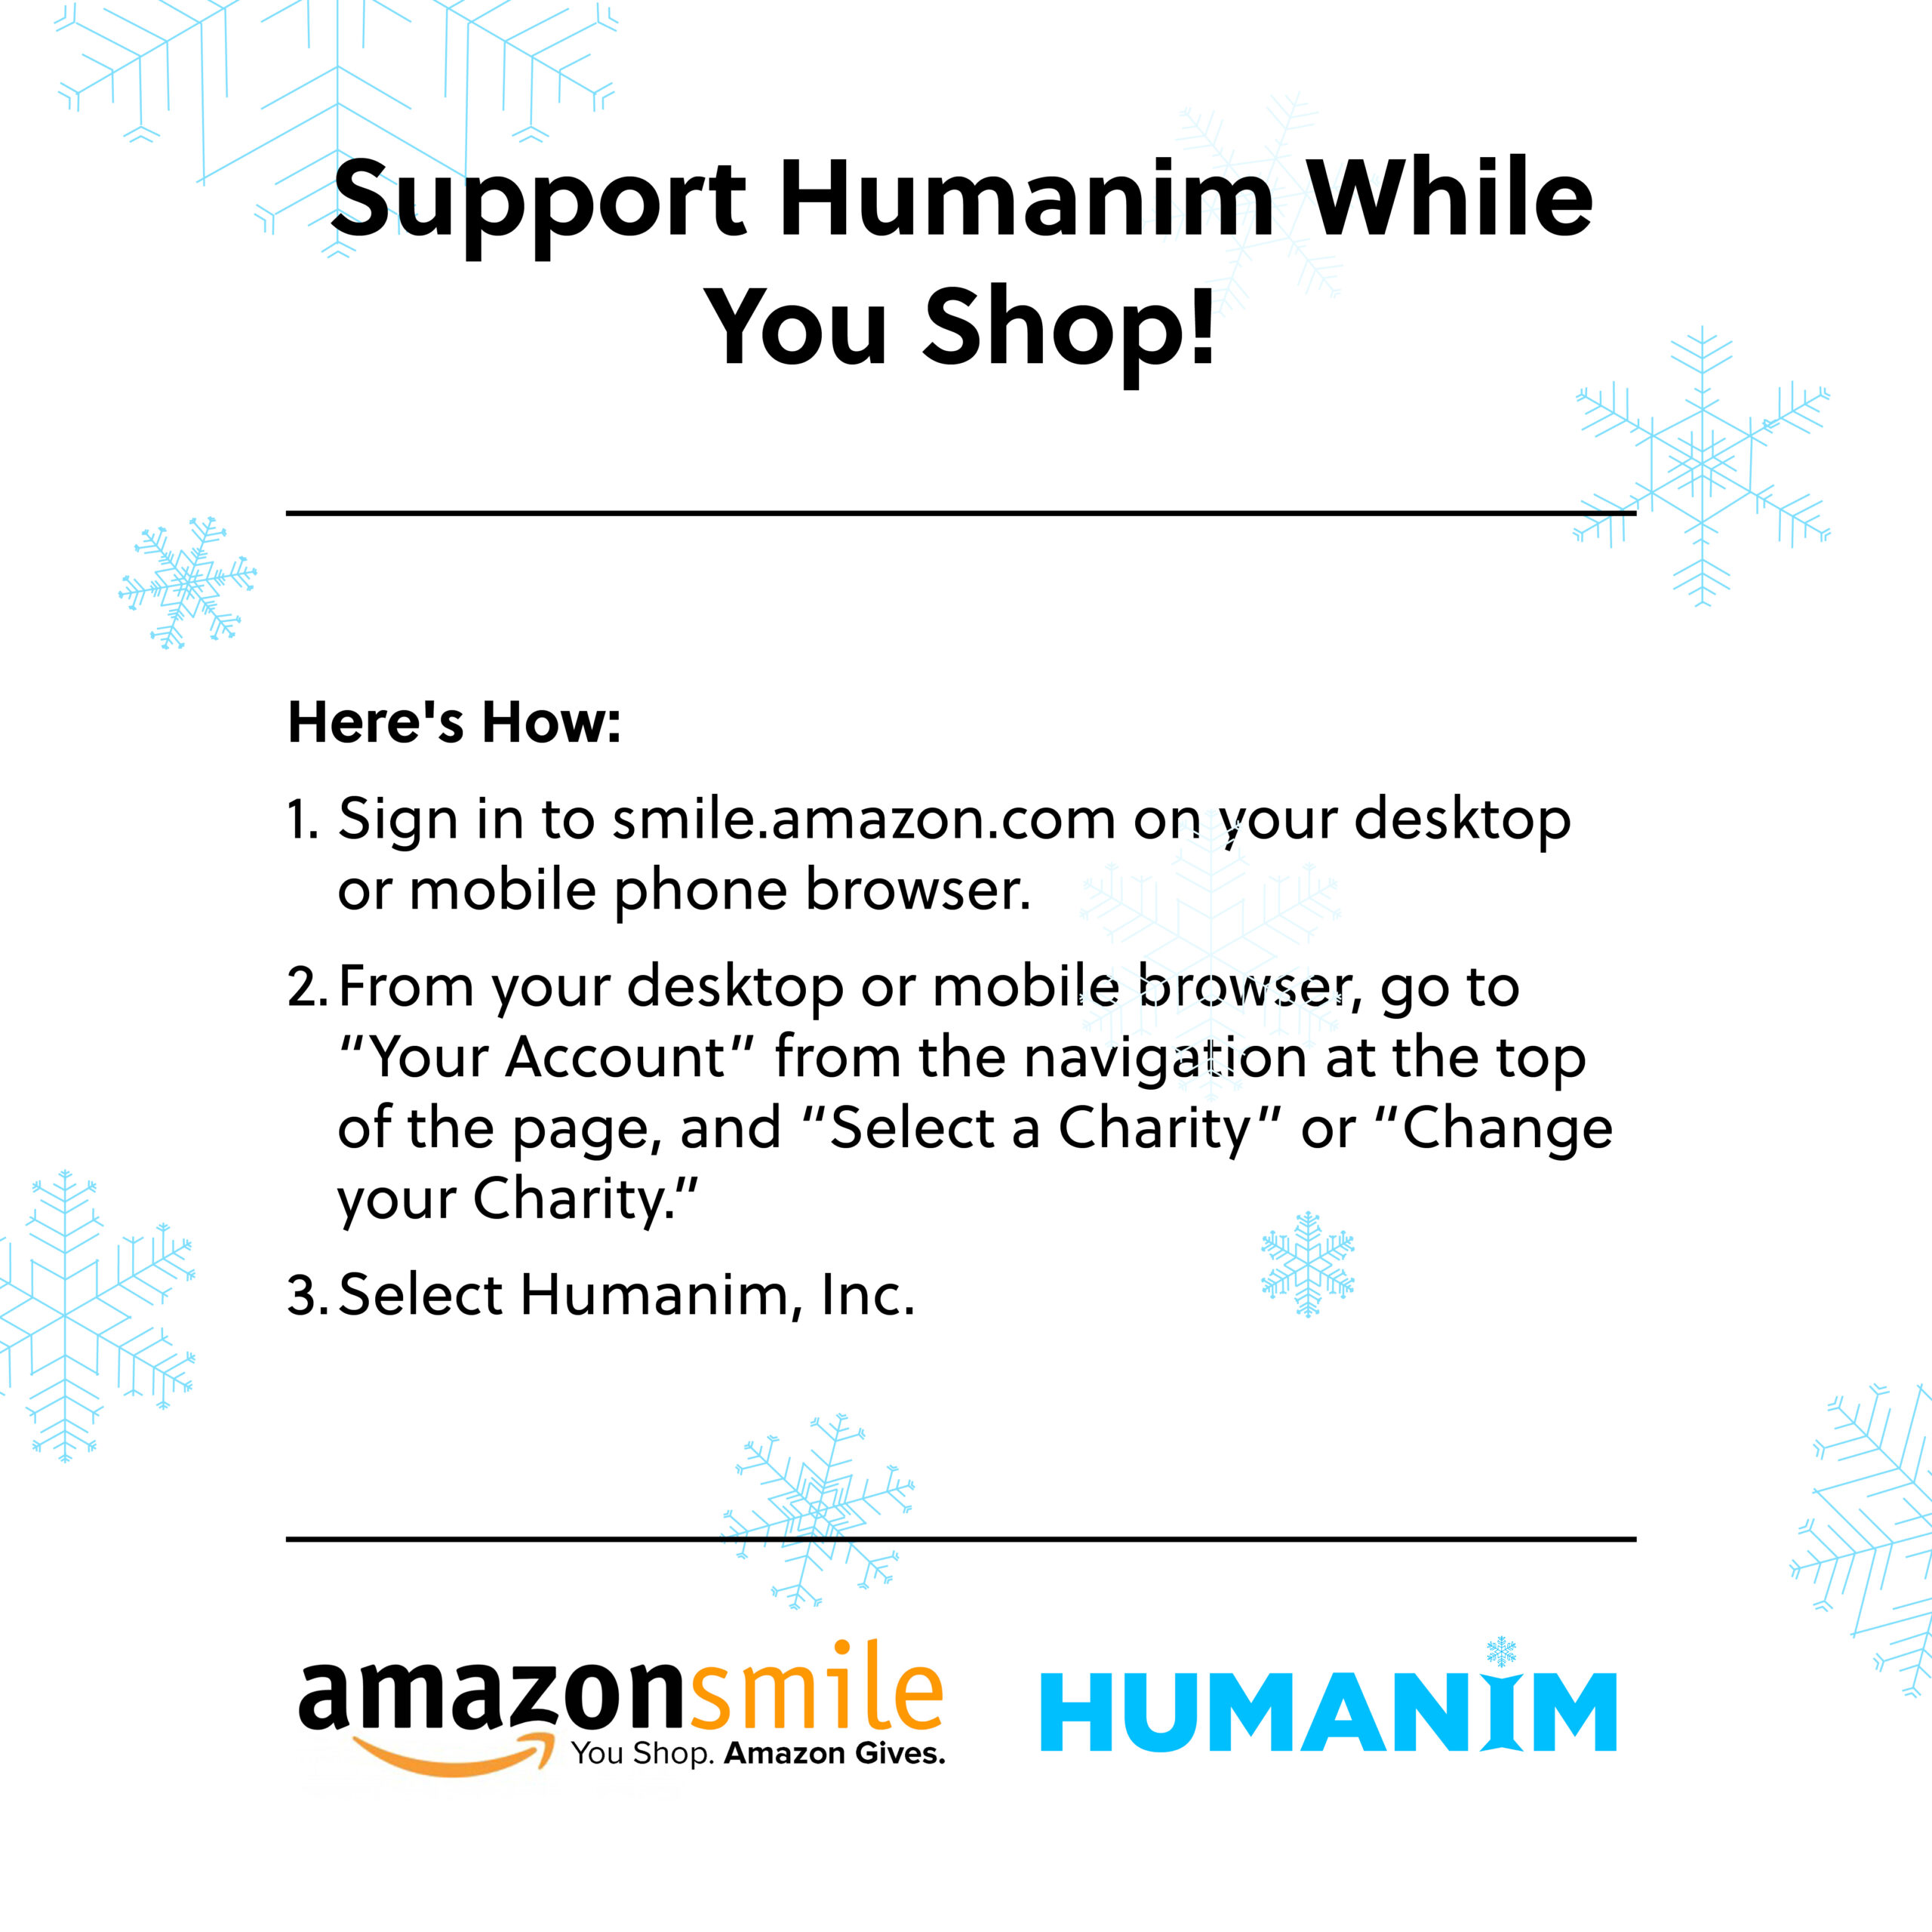 Support Humanim While You Shop!